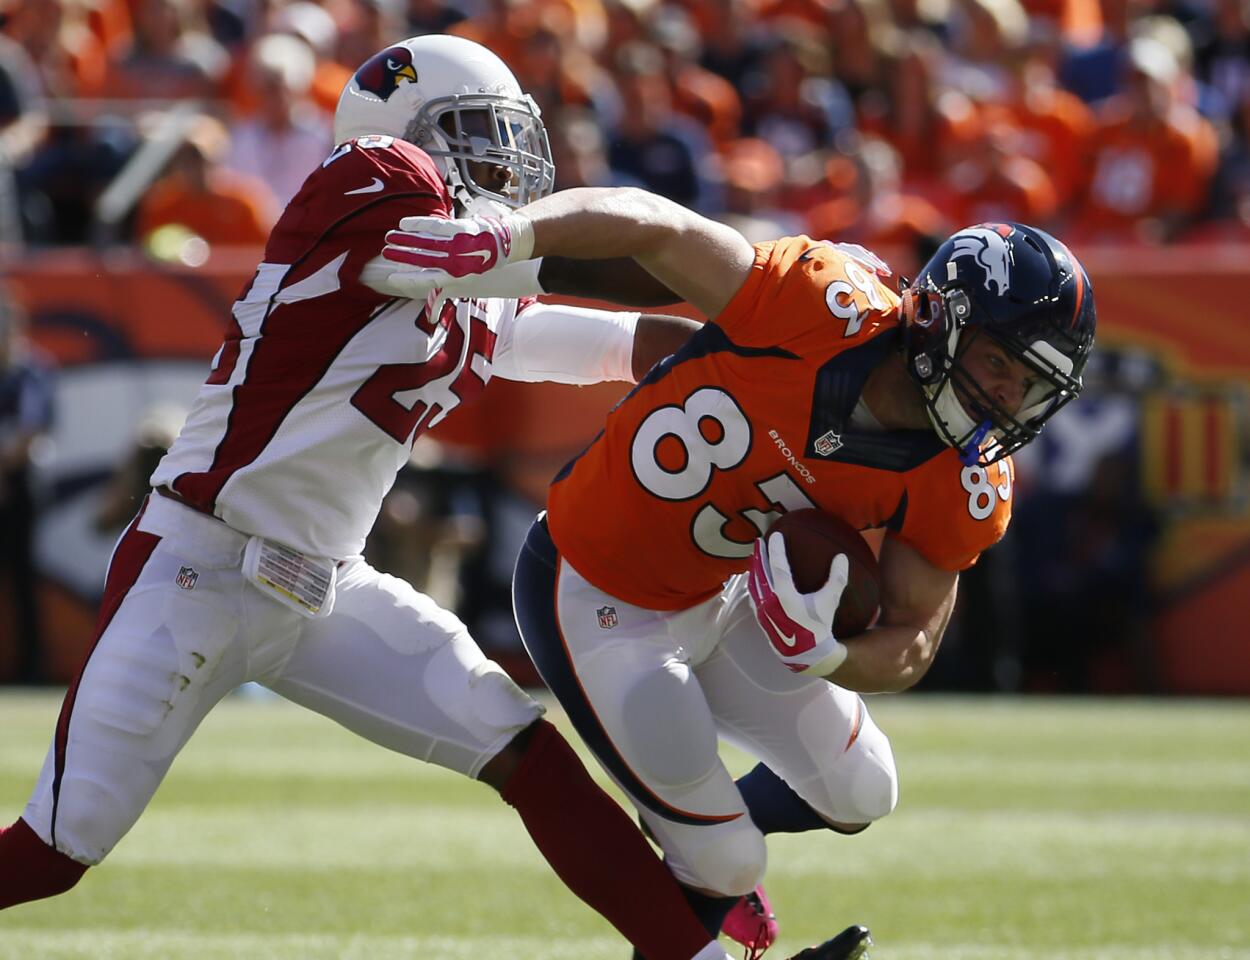 Denver Broncos wide receiver Wes Welker (83) is tackled by Arizona Cardinals cornerback Jerraud Powers during the first half of an NFL football game on Oct. 5, 2014. Welker not only showed up at Del Mar in 2013, but he also had a horse named Undrafted that ran that day, according to the San Diego Union Tribune.